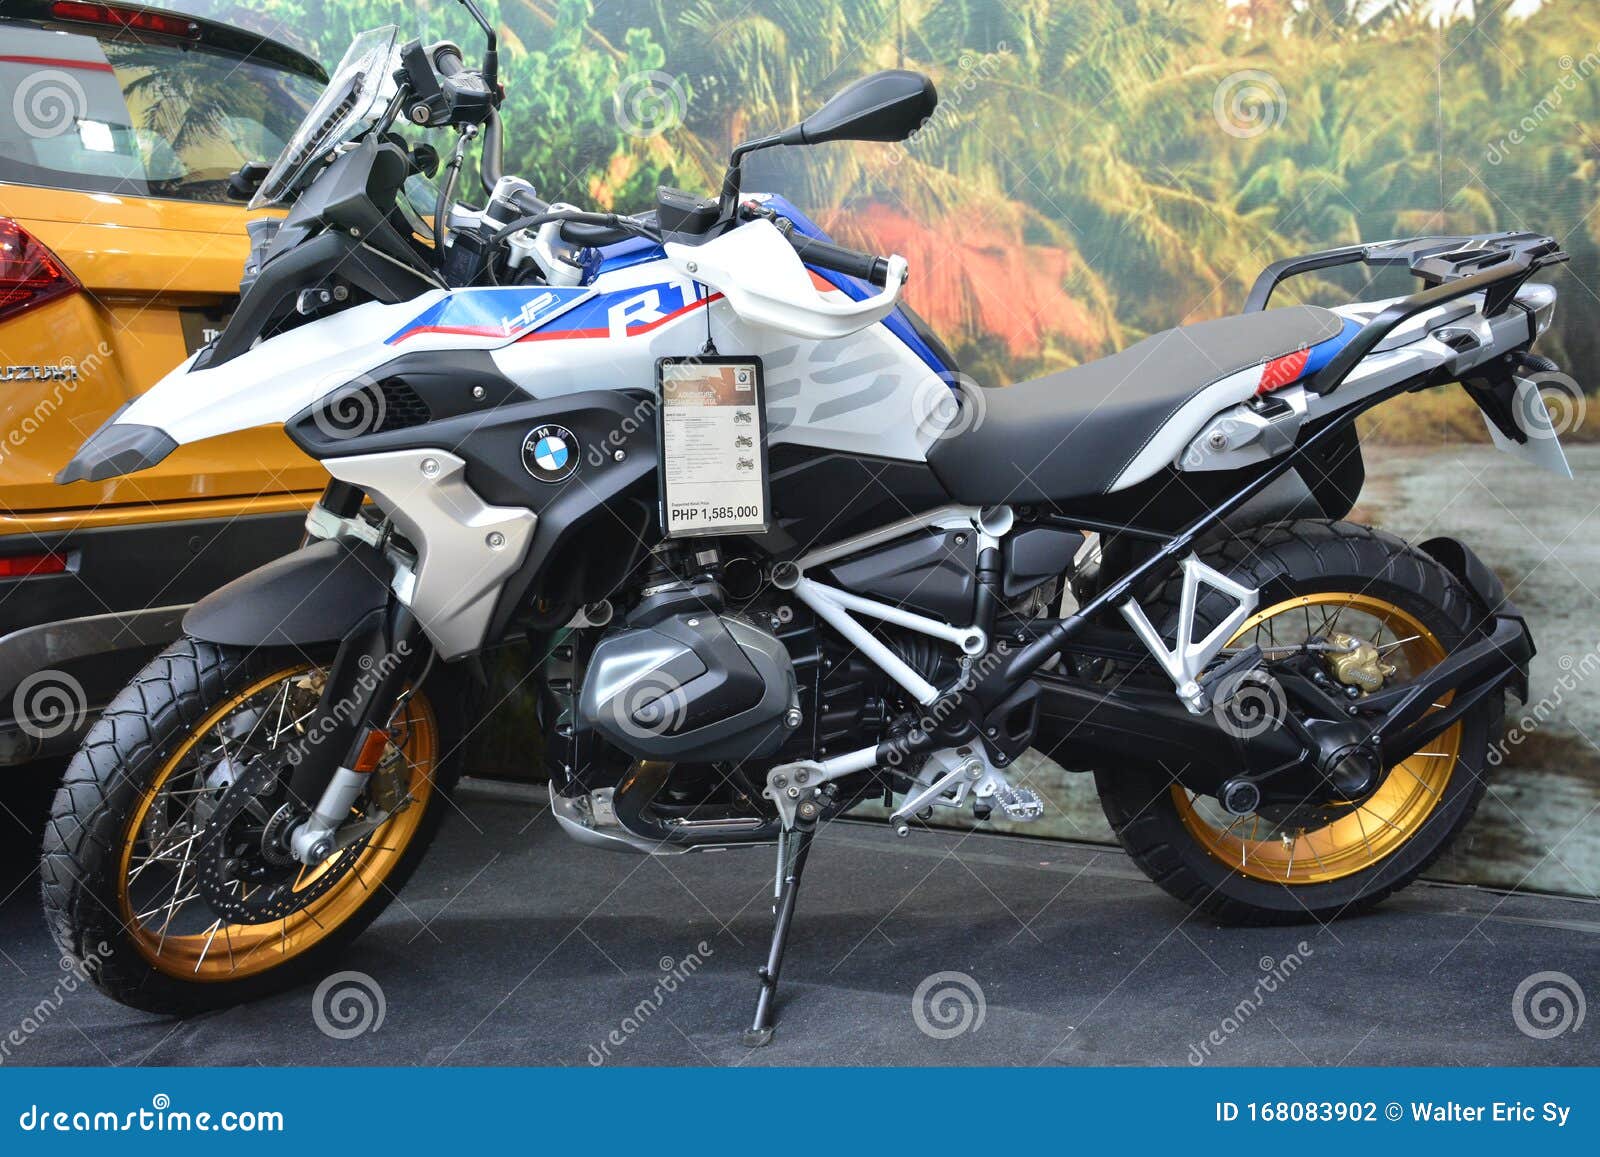 Bmw R 1250 Gs Motorcycle At Manila Auto Salon Editorial Photography Image Of German R1250